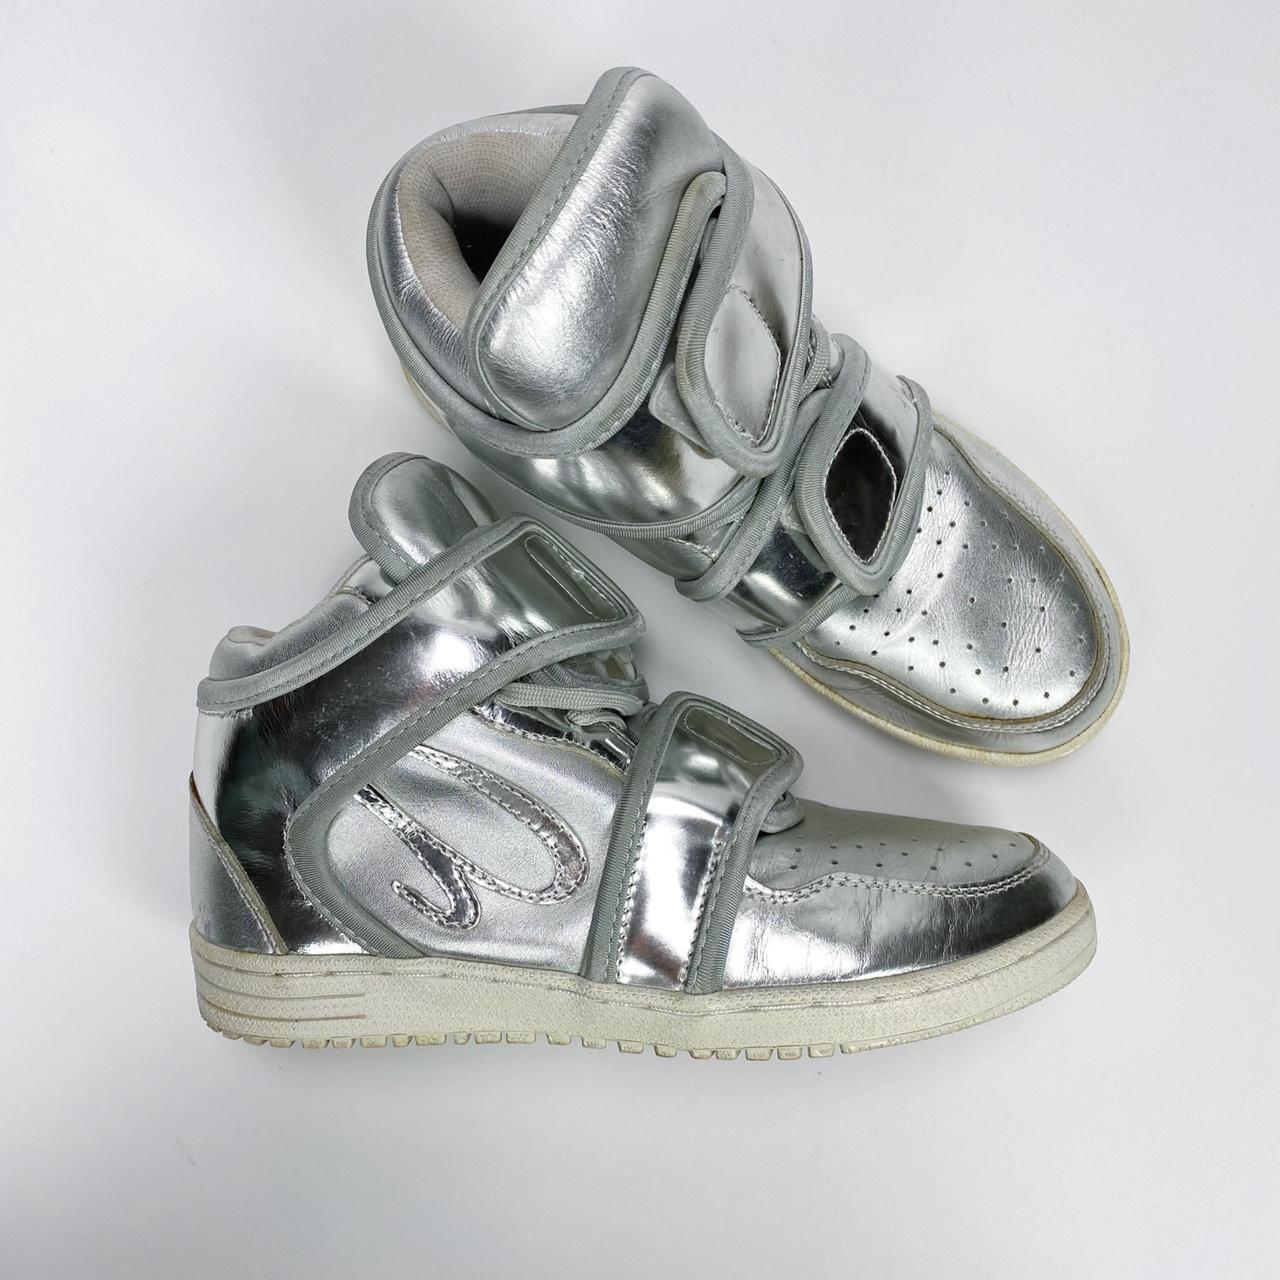 Product Image 2 - Vintage Ato Matsumoto sneaker 

Inspired